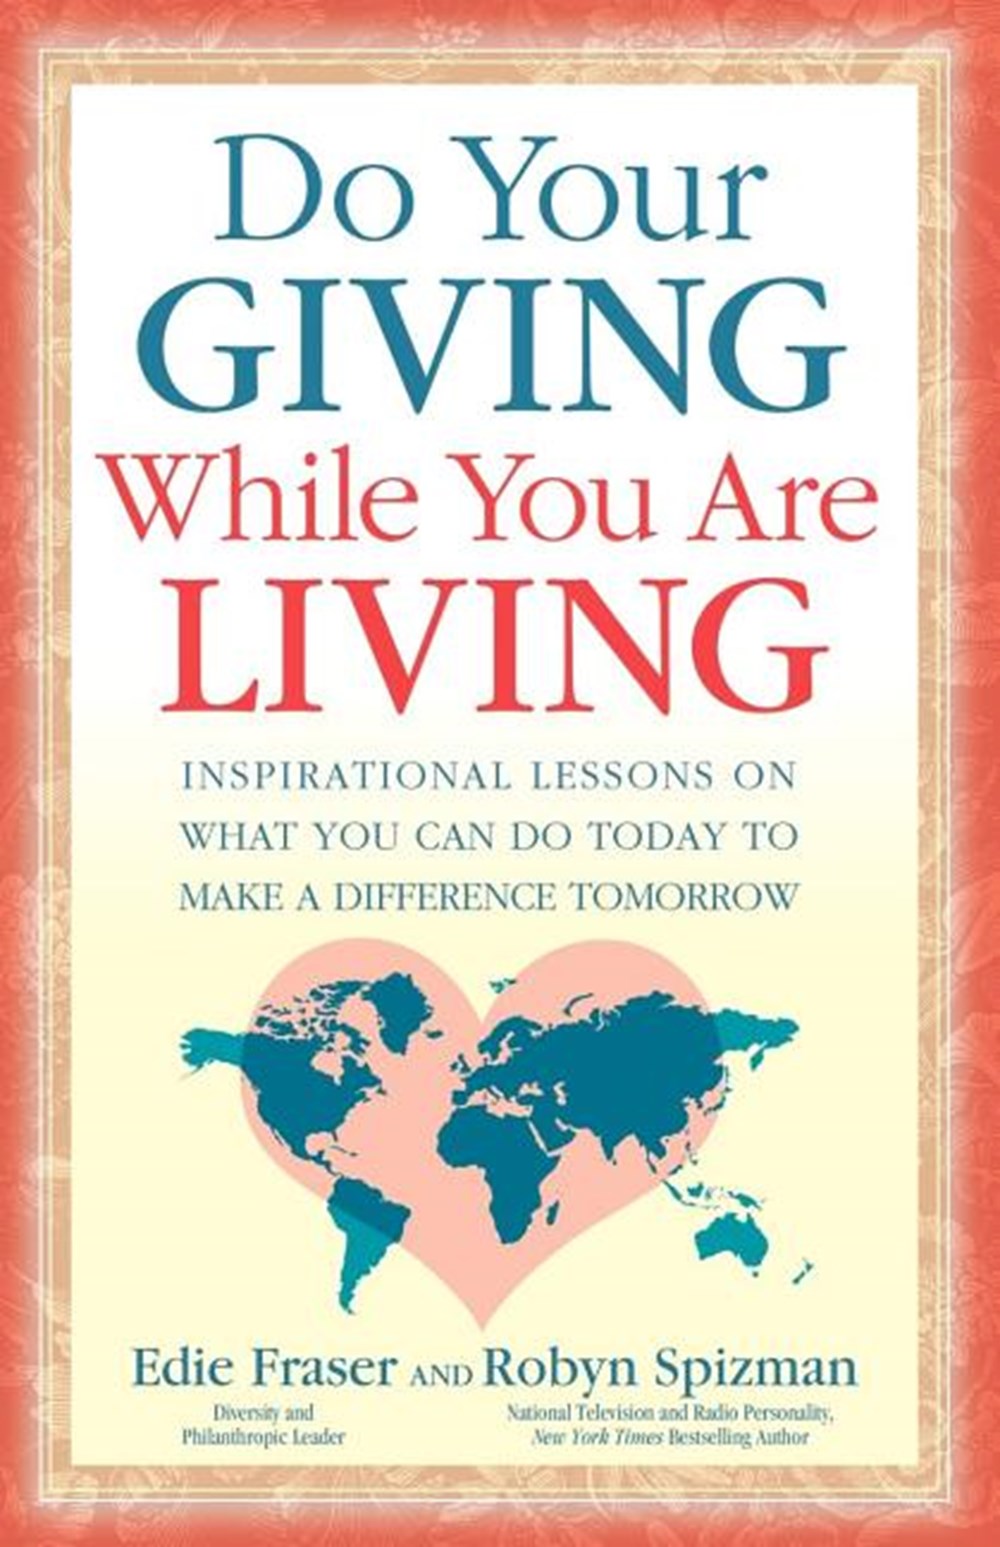 Do Your Giving While You Are Living: Inspirational Lessons on What You Can Do Today to Make a Differ